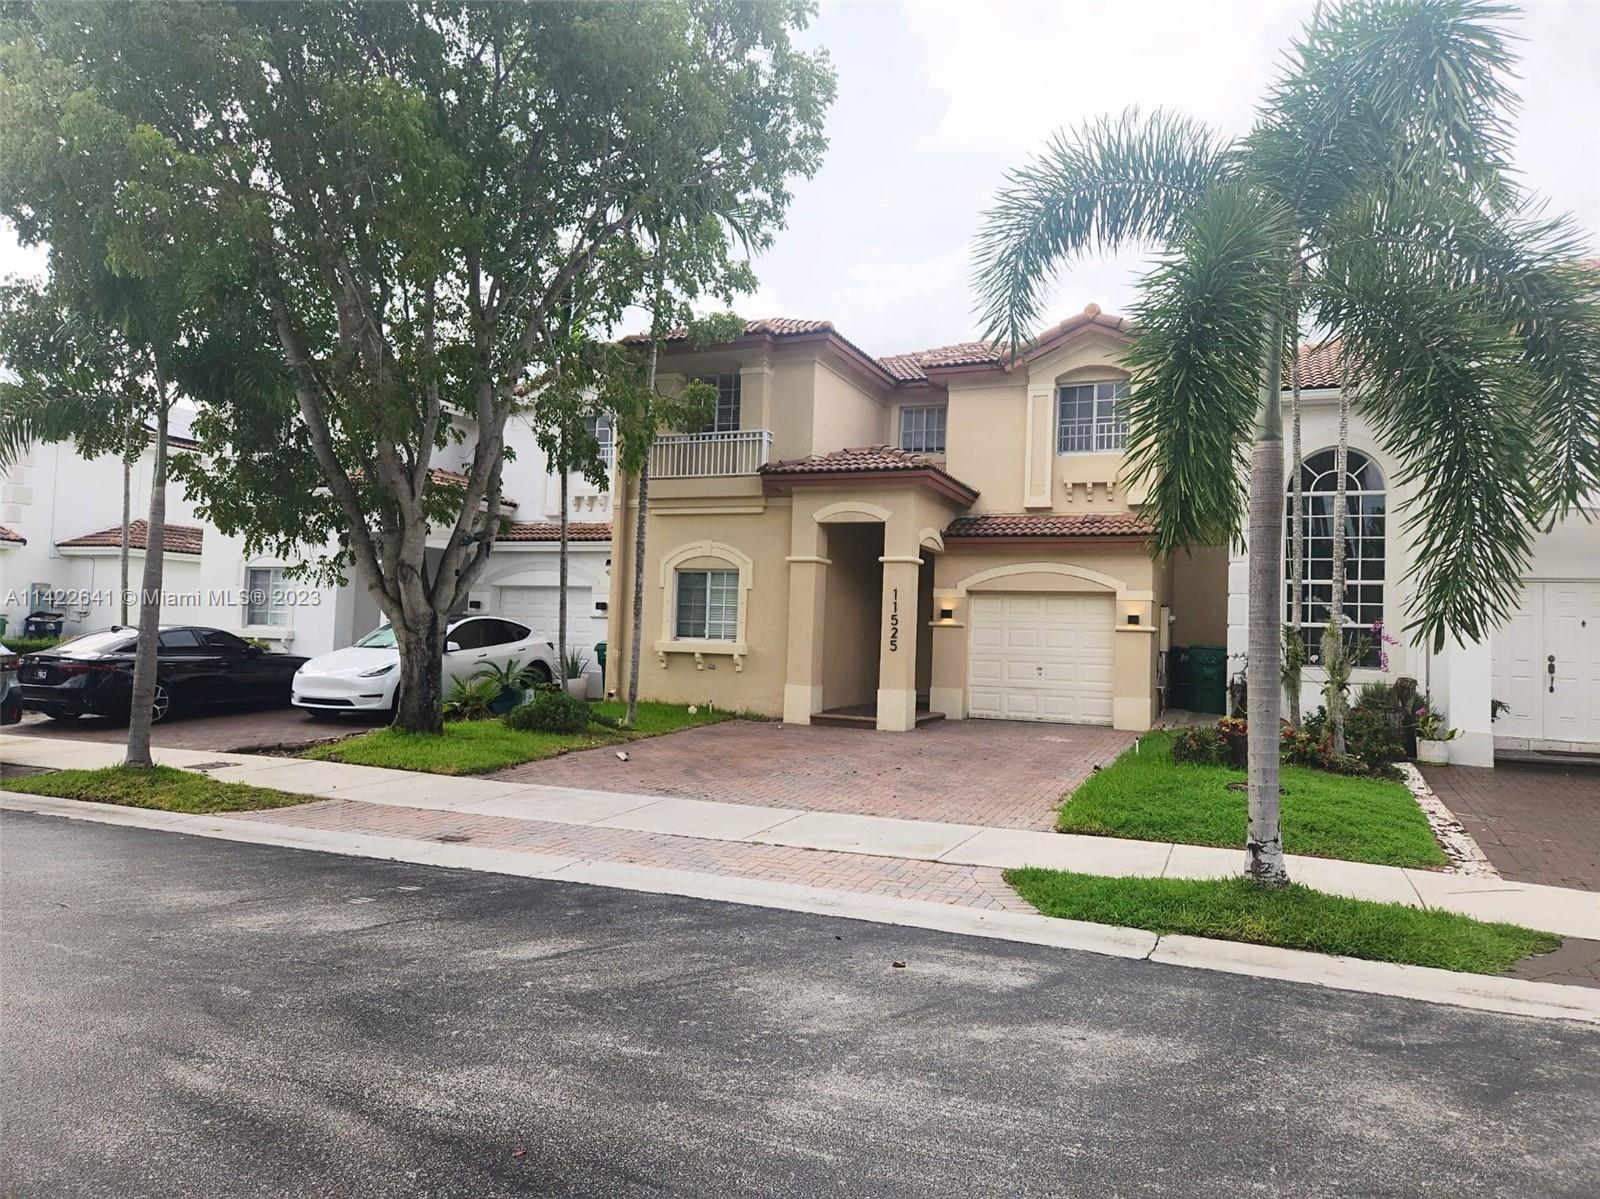 Photo of 11525 NW 71st St #11525 in Doral, FL